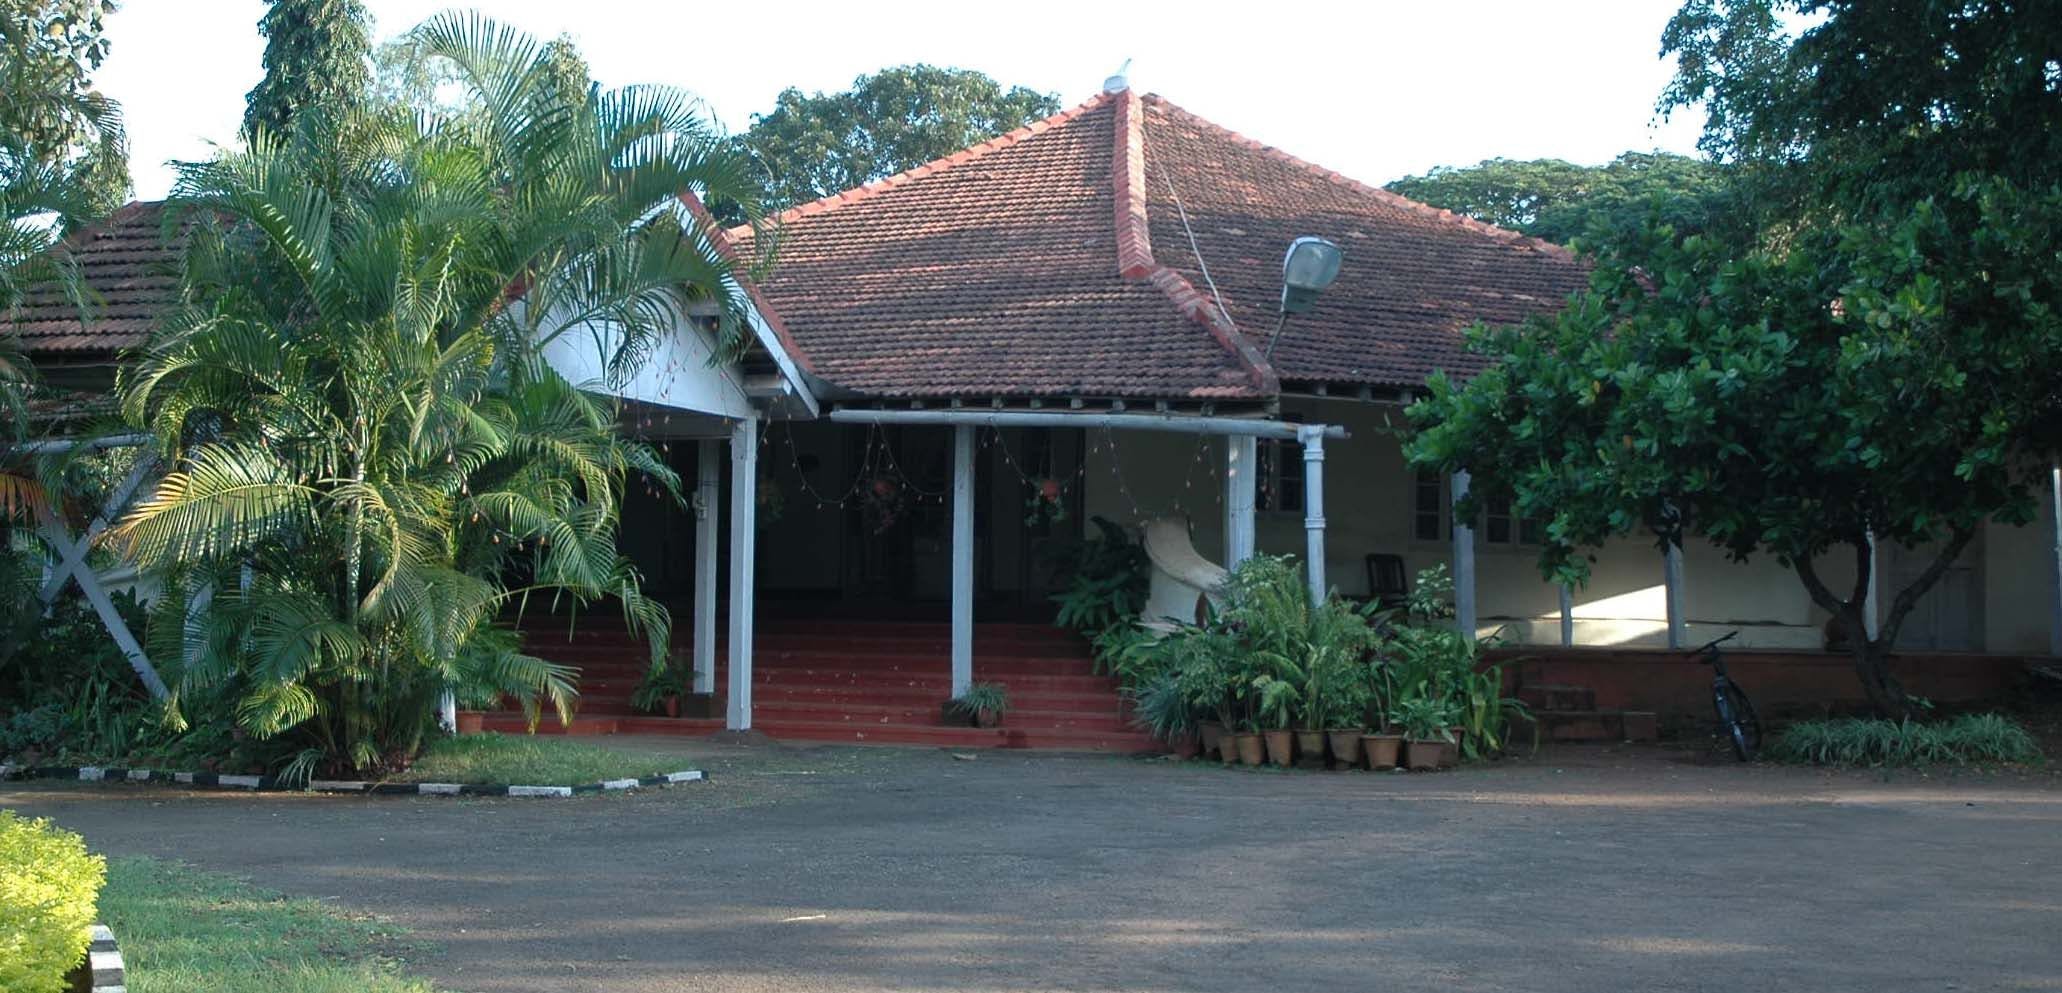 The bungalow at Dharwad